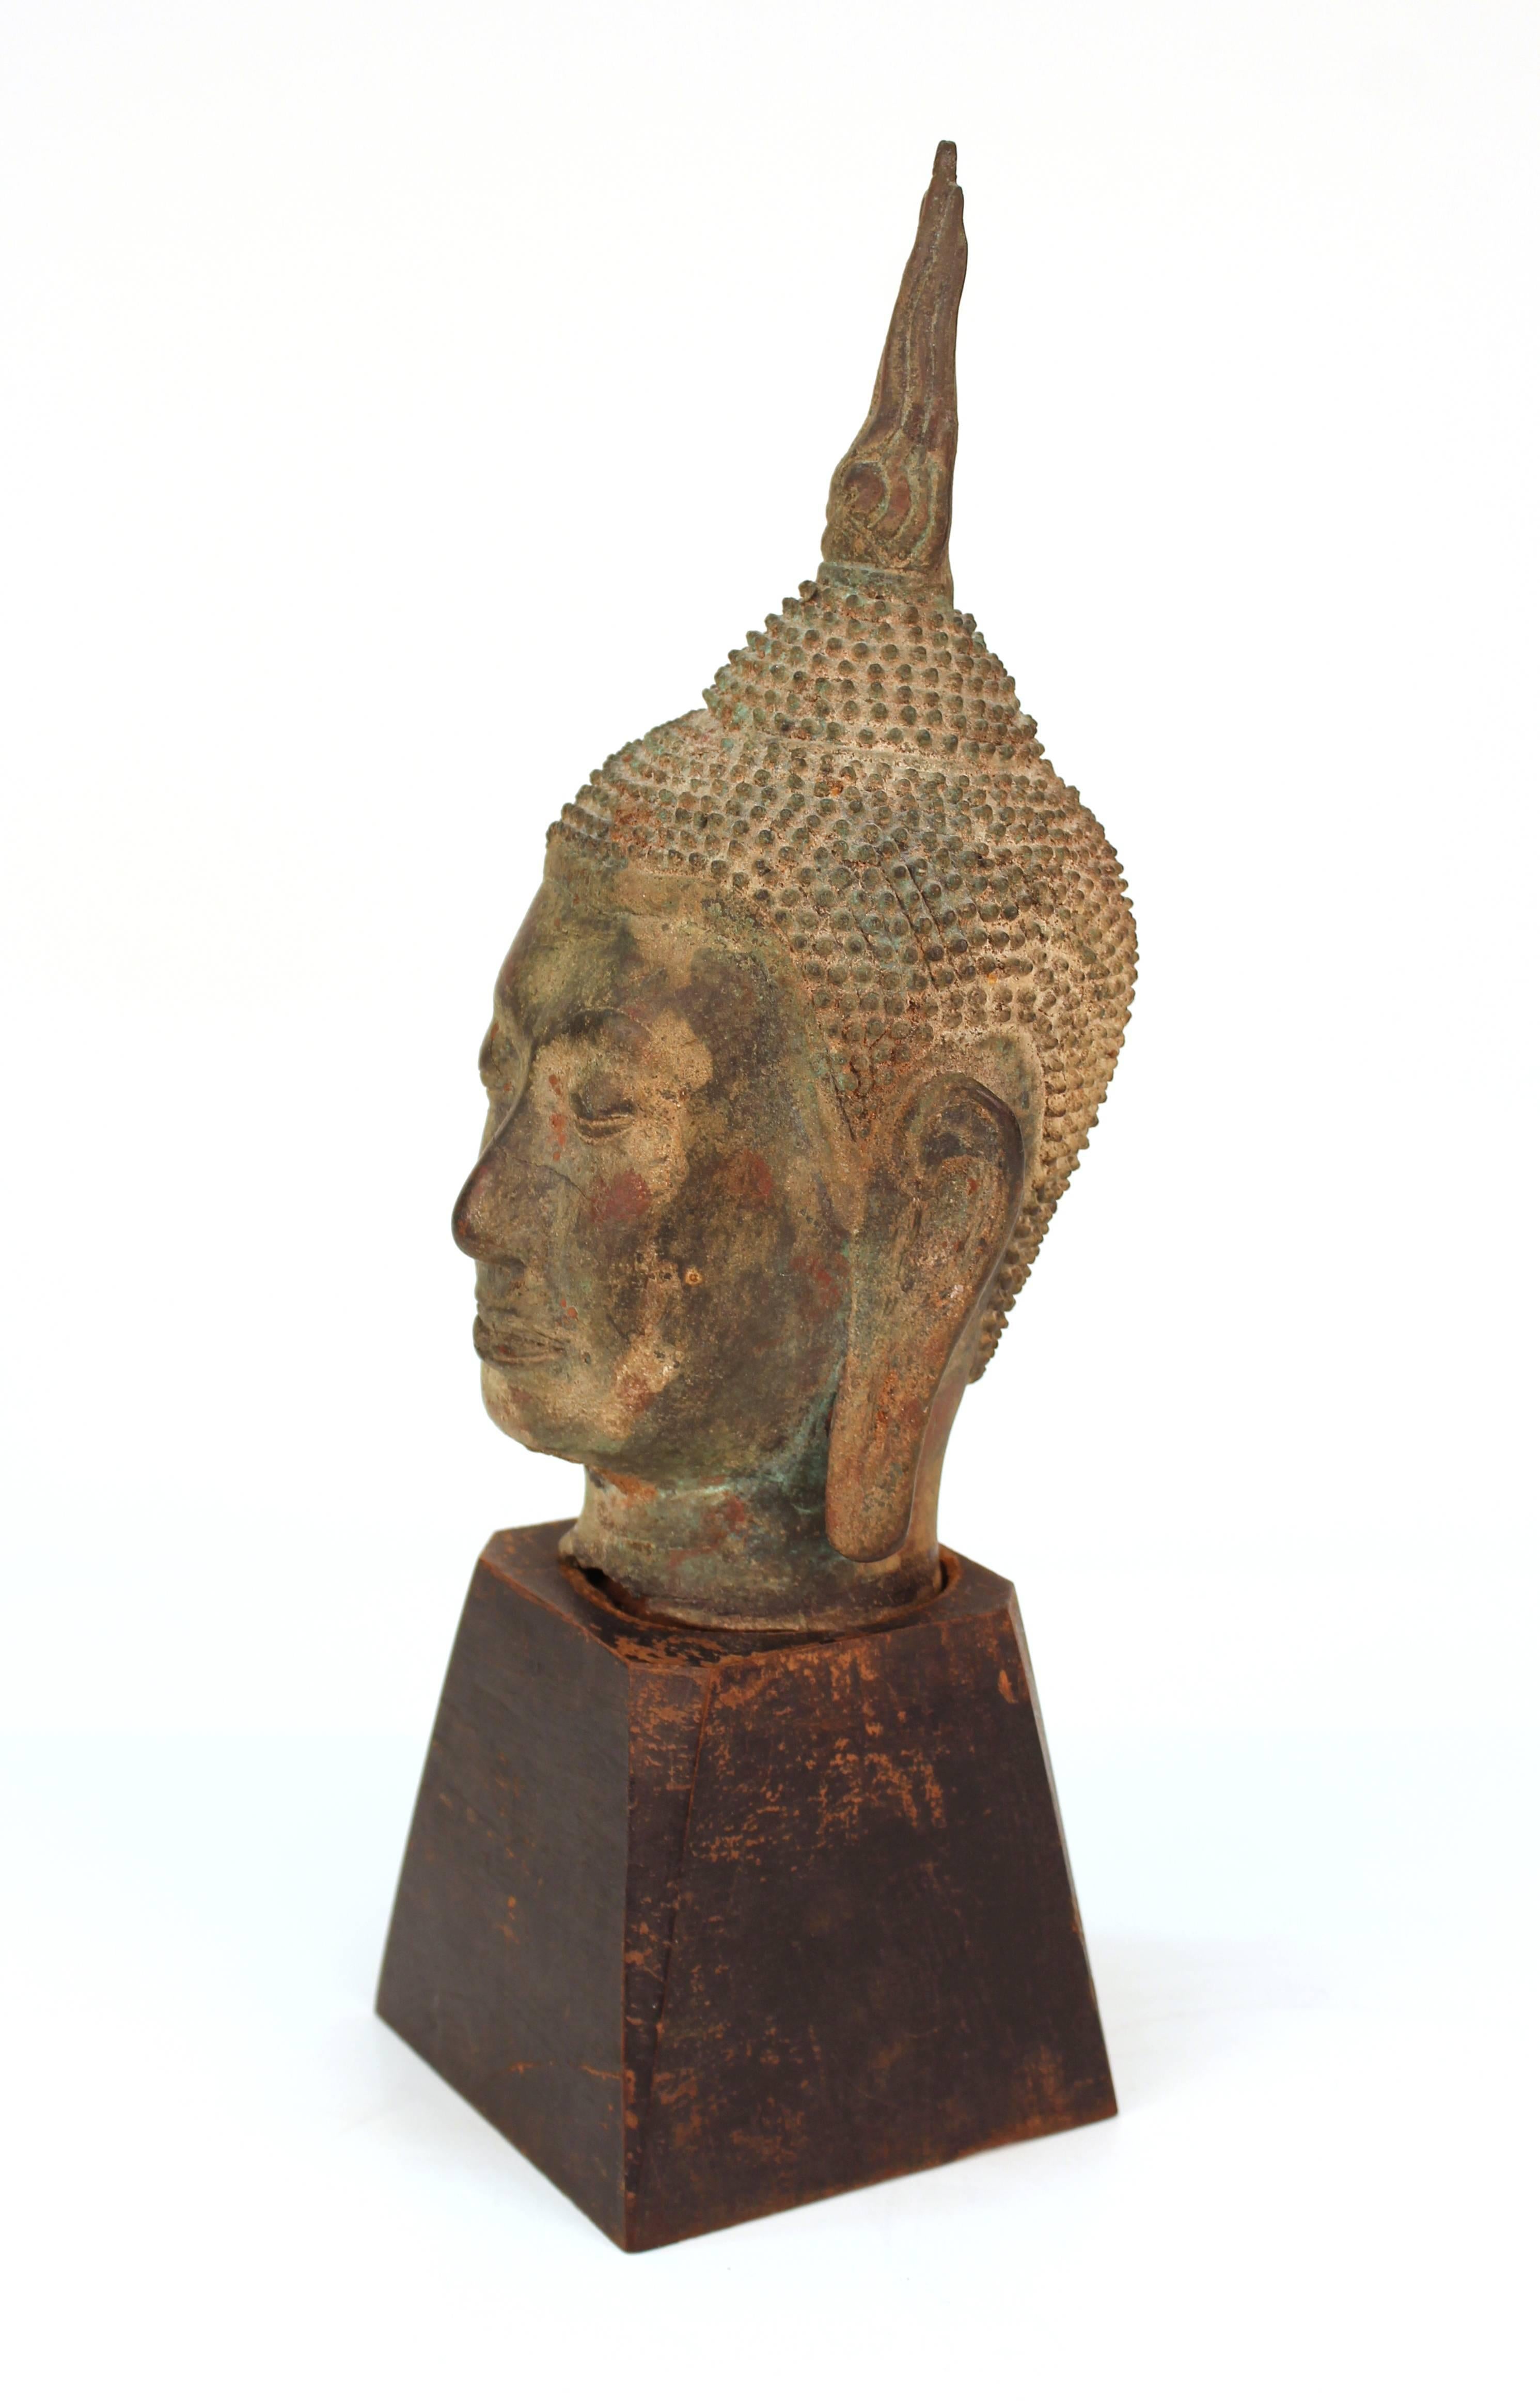 Sukhothai style Buddha head in bronze from Thailand. Crafted in bronze and mounted on a painted wooden base. The head can be removed from the stand. Wear includes natural discoloration due to age and uneven neckline. There is some wear to the paint